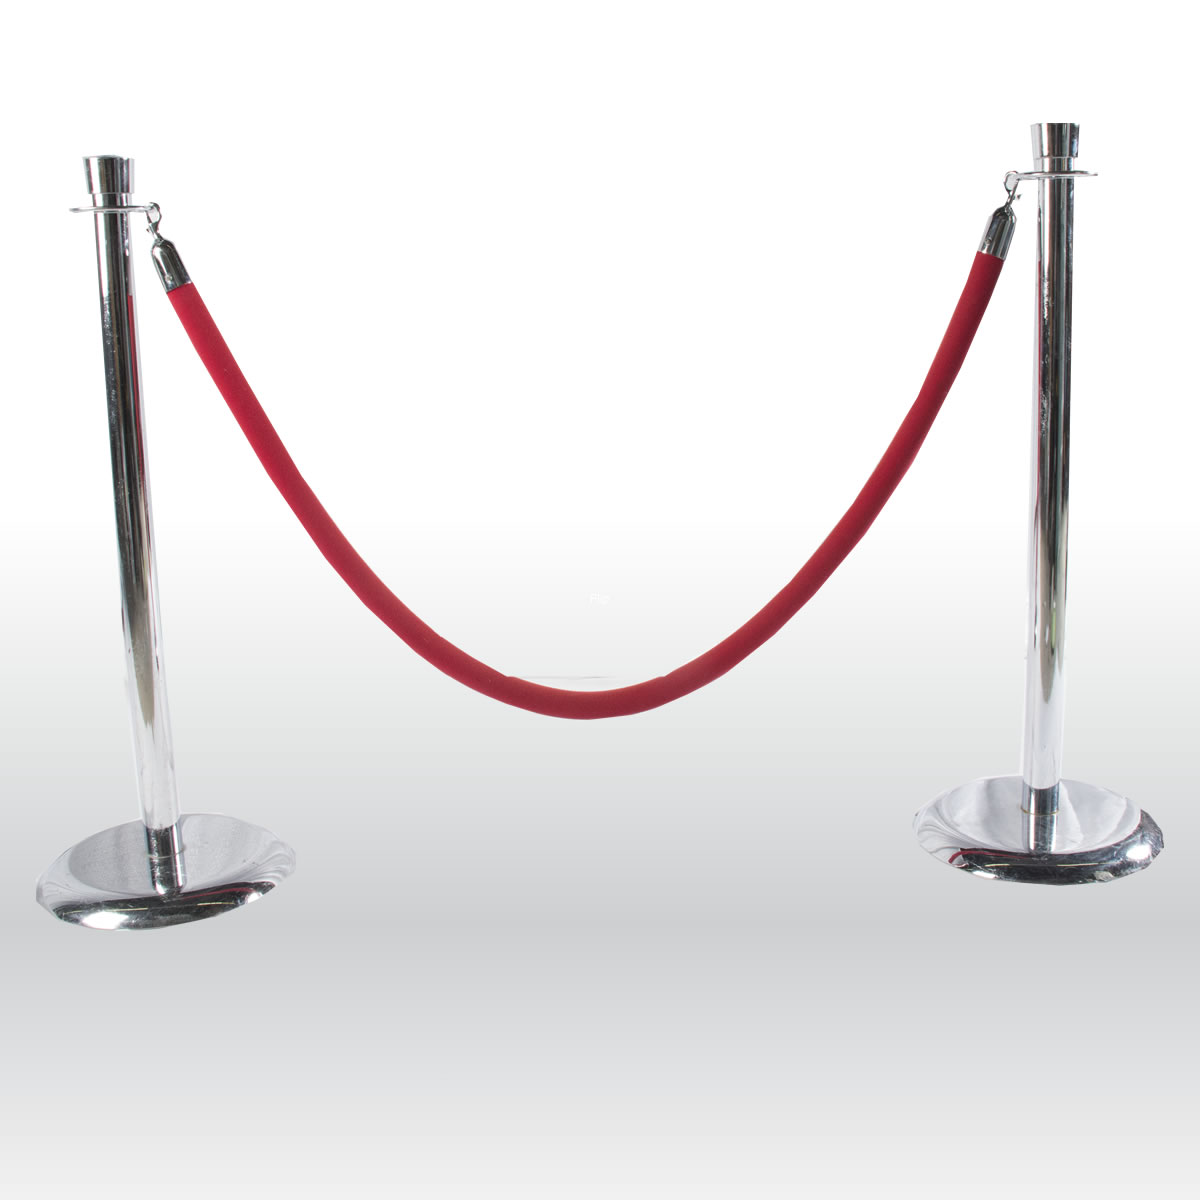 RED VELVET OR VELOUR ROPE FOR STANCHIONS, Magic Special Events